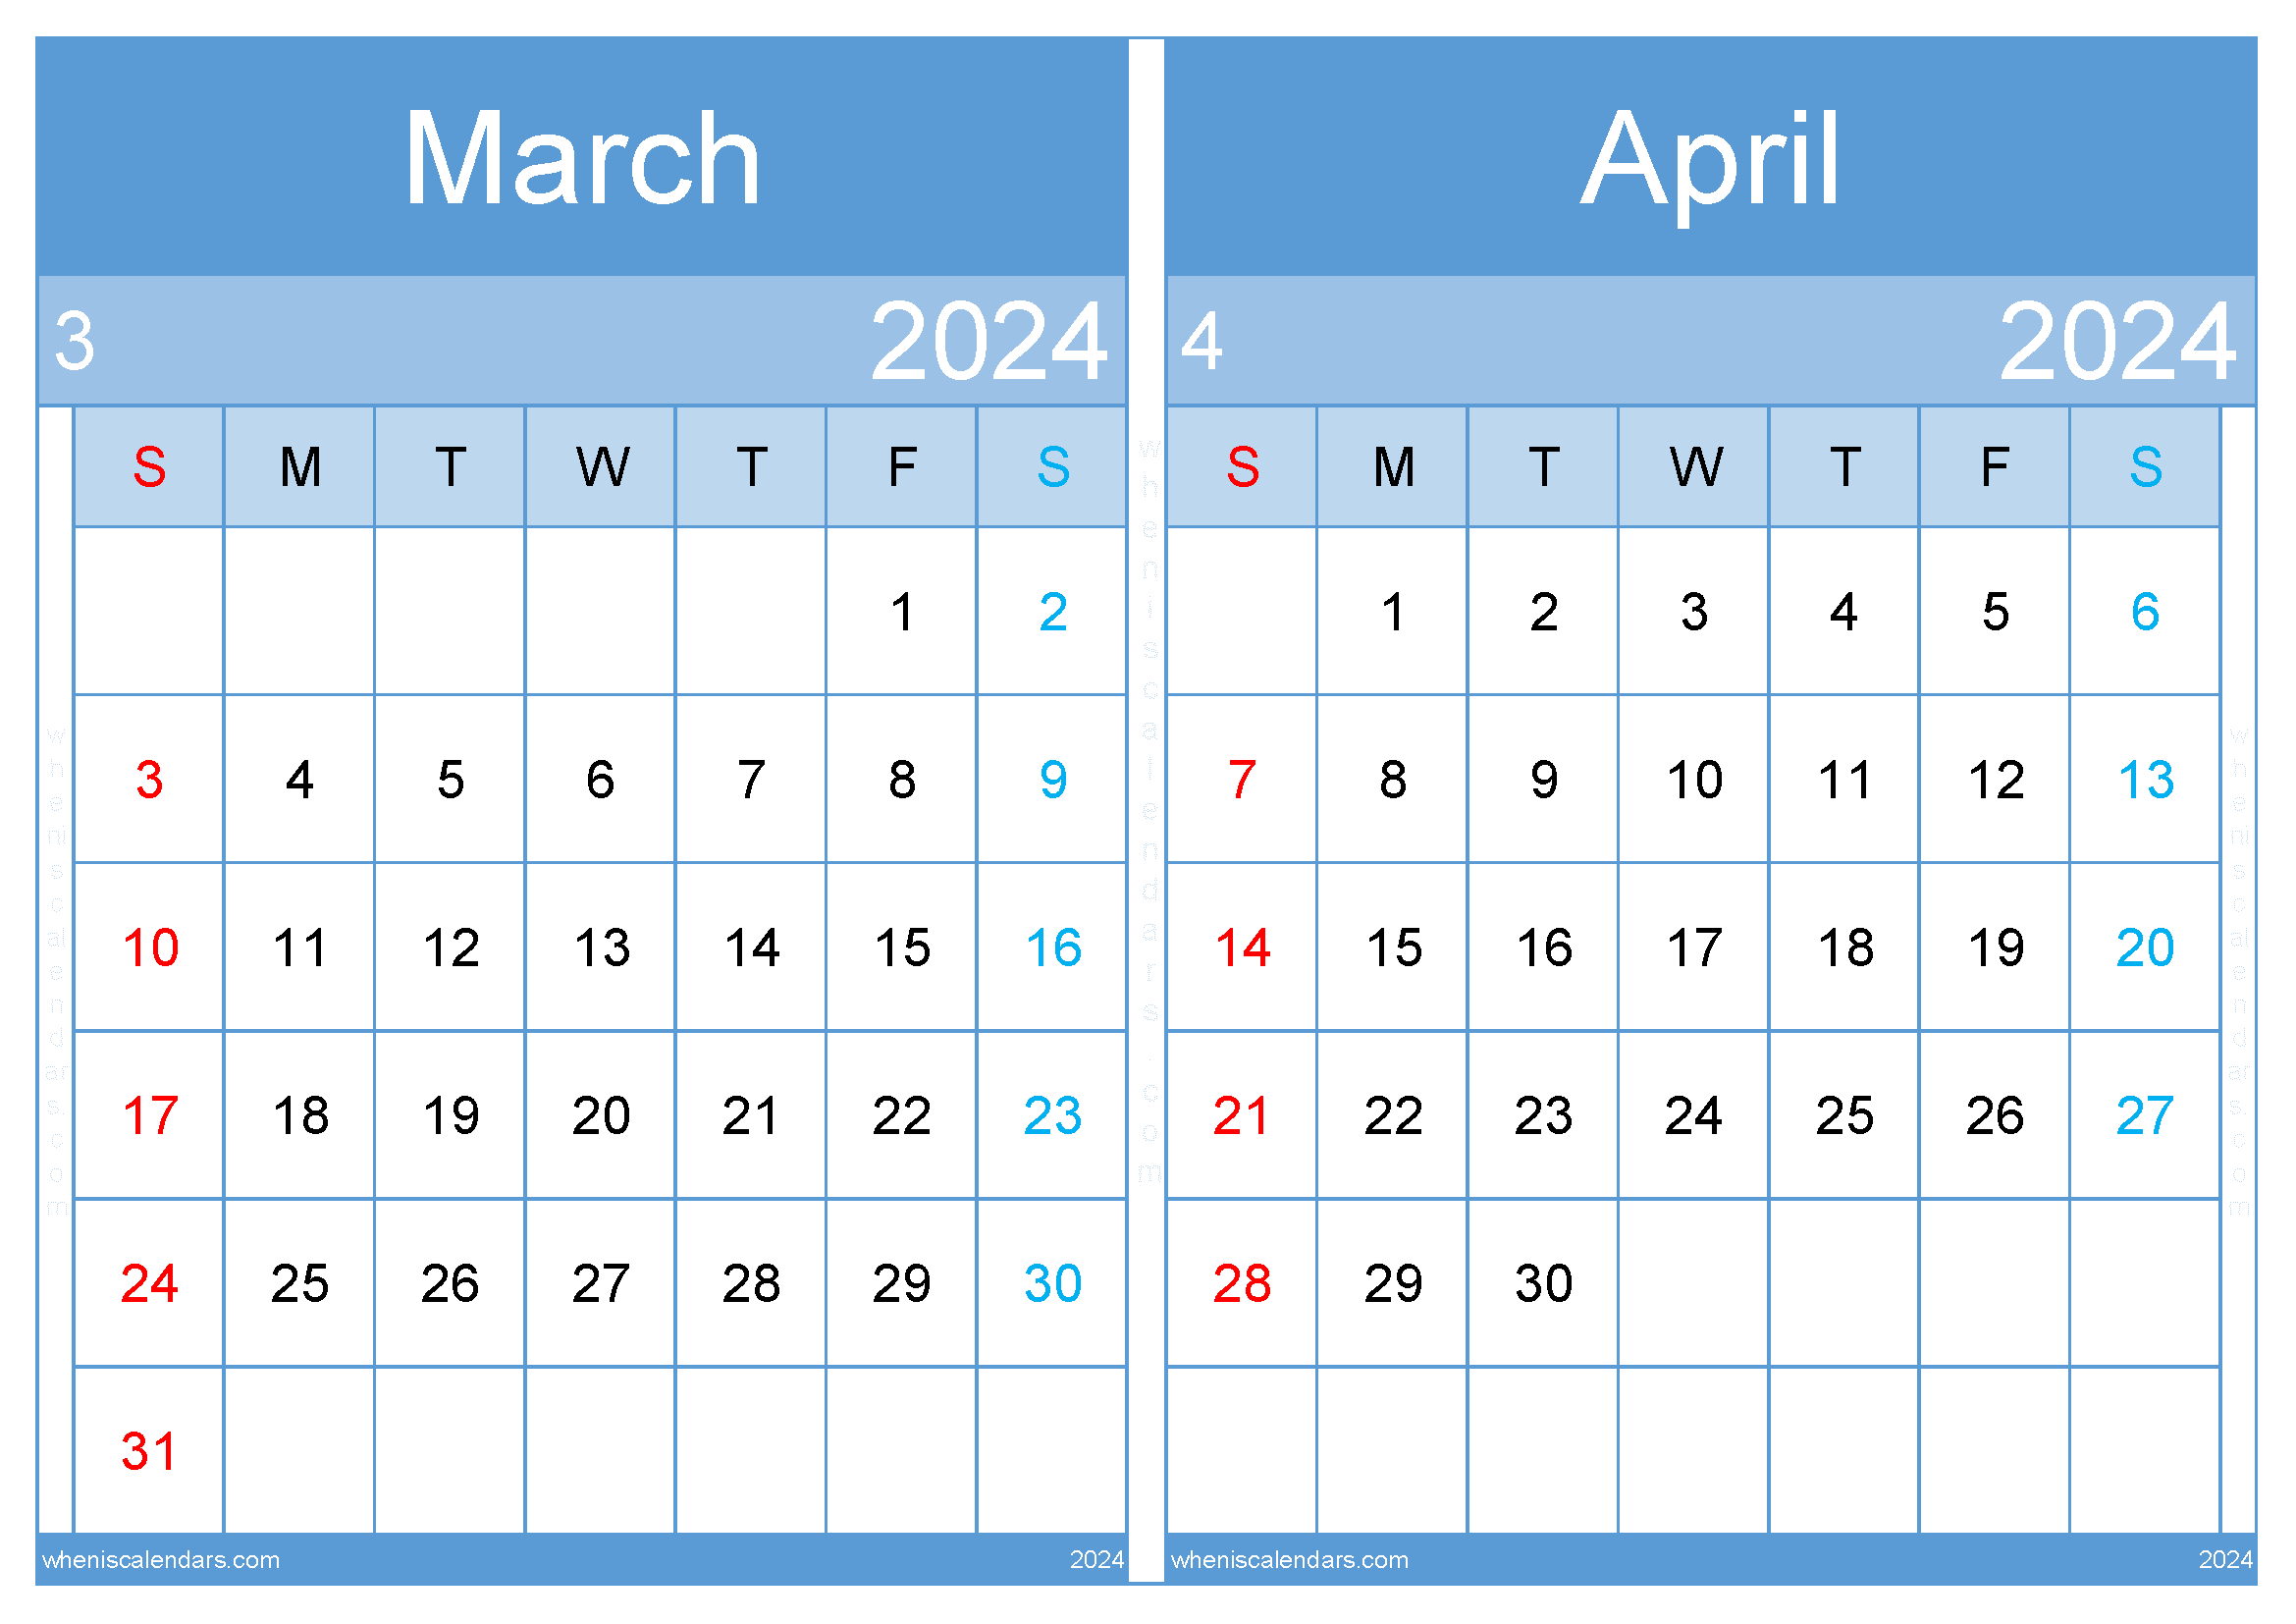 March and April 2024 Calendar Two-Month